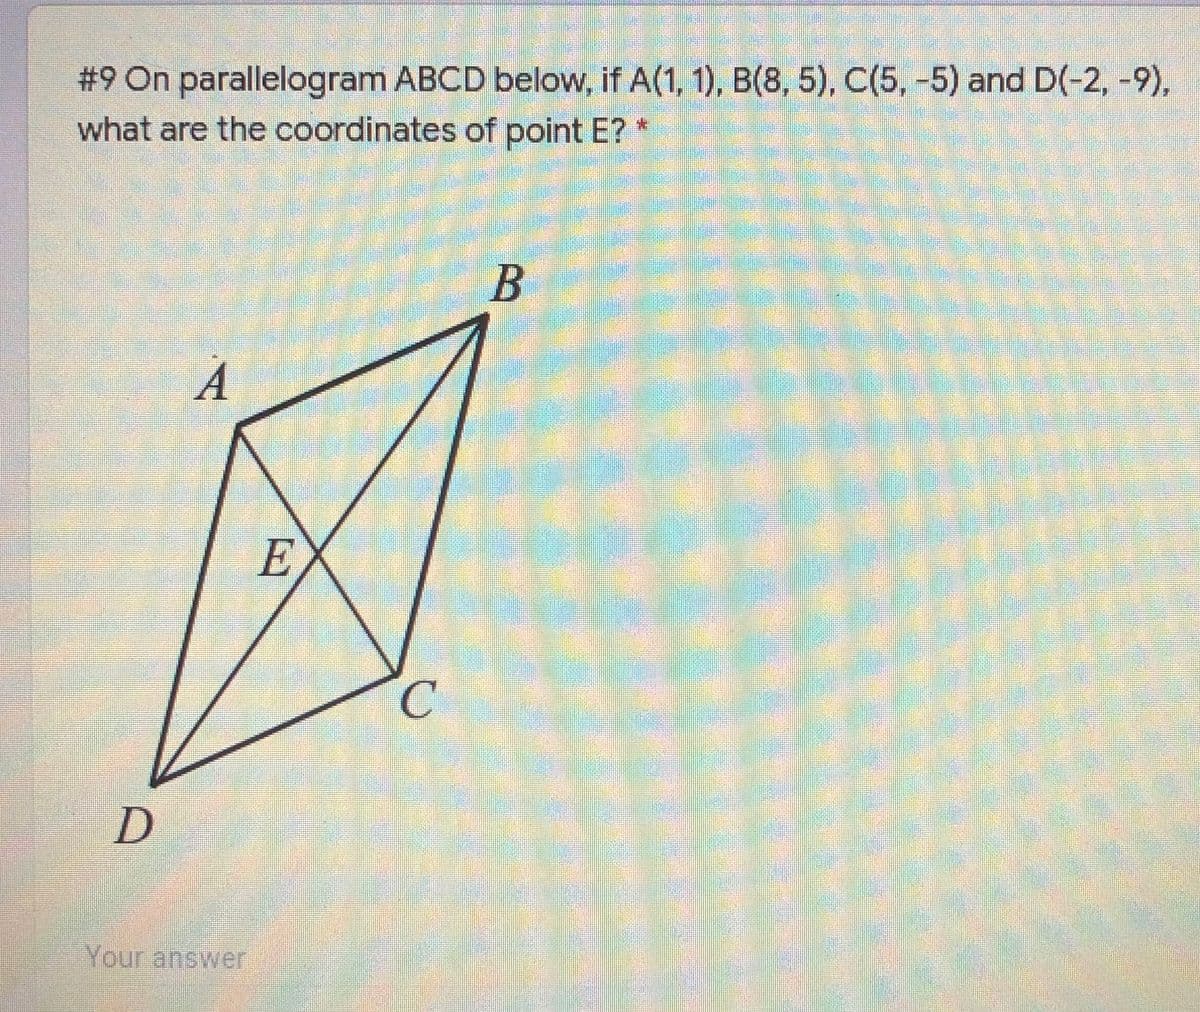 # 9 On parallelogram ABCD below, if A(1, 1), B(8, 5), C(5, -5) and D(-2, -9),
what are the coordinates of point E?
А
E.
Your answer
